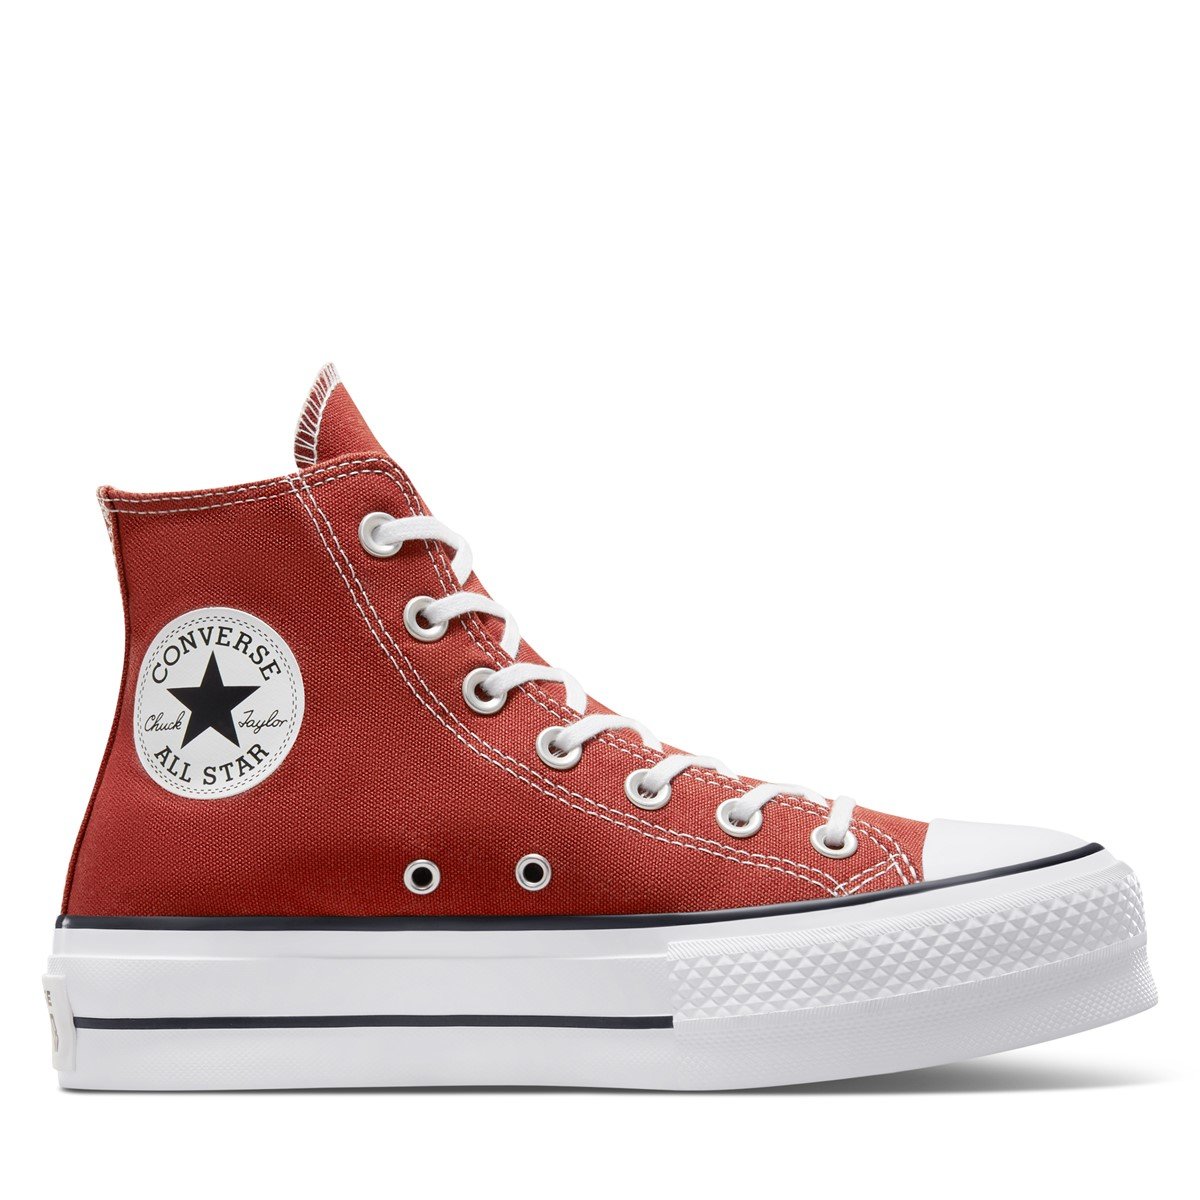 Women's Chuck Taylor All Star Lift Hi Sneakers in Red